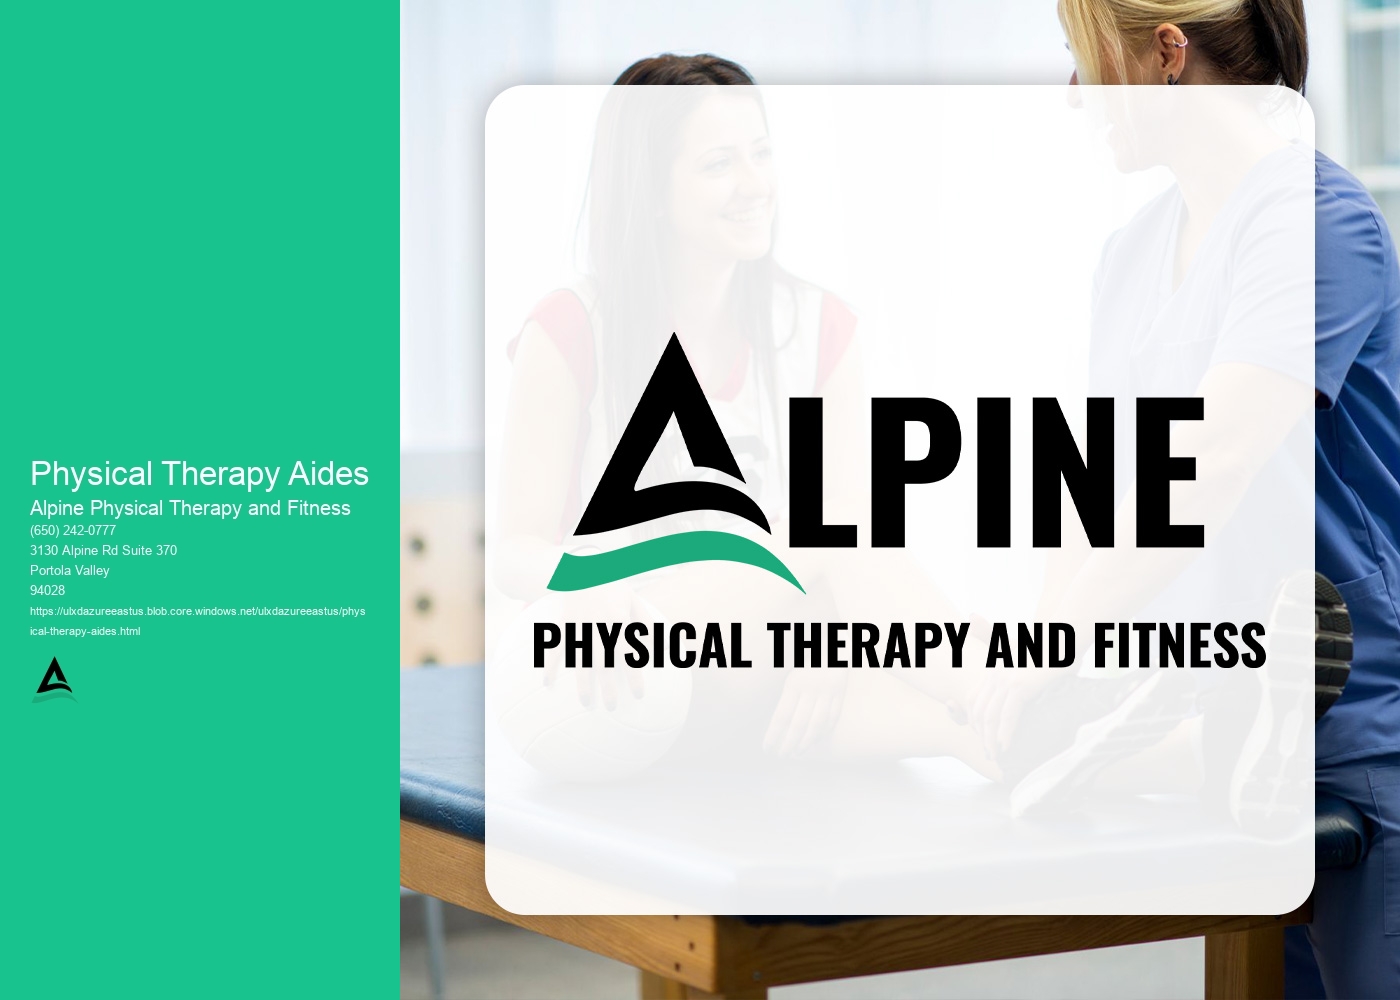 How does a physical therapy aide assist in documenting and tracking patient progress and treatment outcomes under the supervision of a licensed physical therapist?